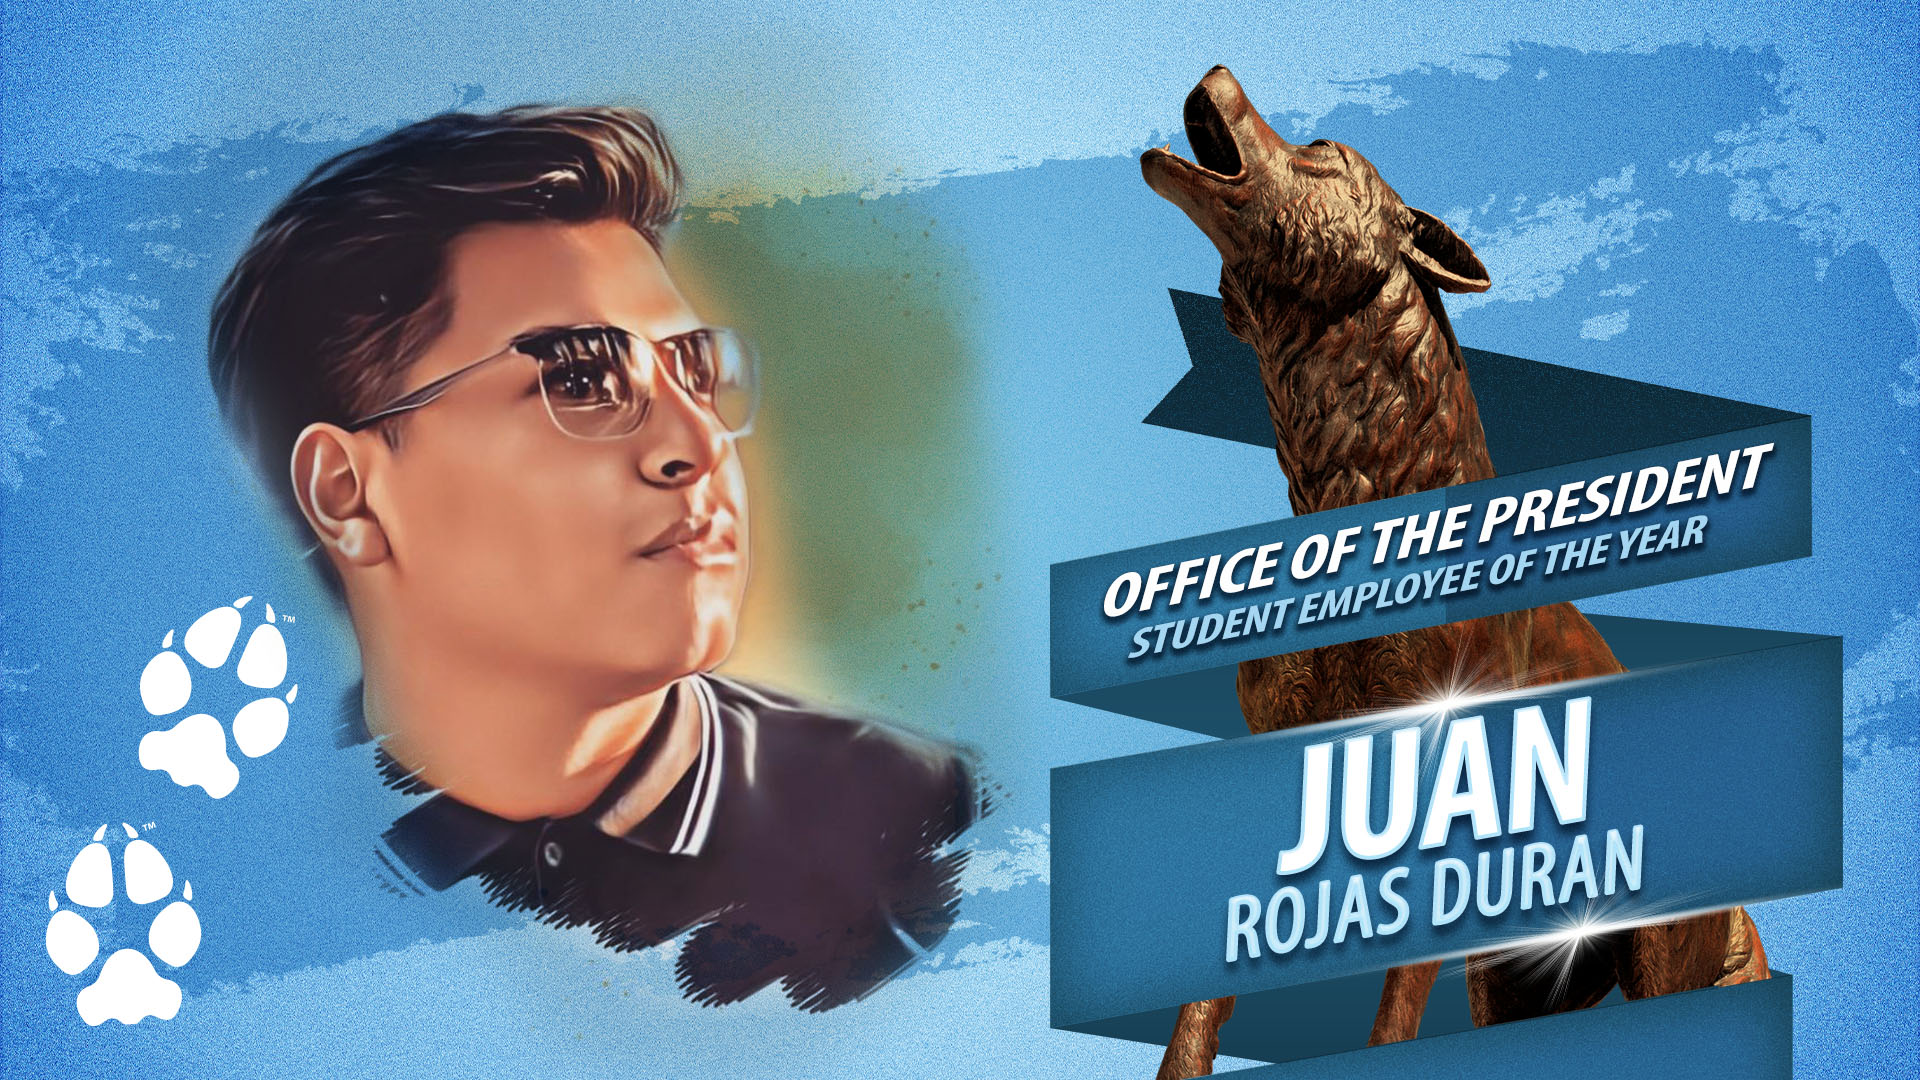 Outstanding Student Employee of the Year for the Office of the President Juan Rojas Duran